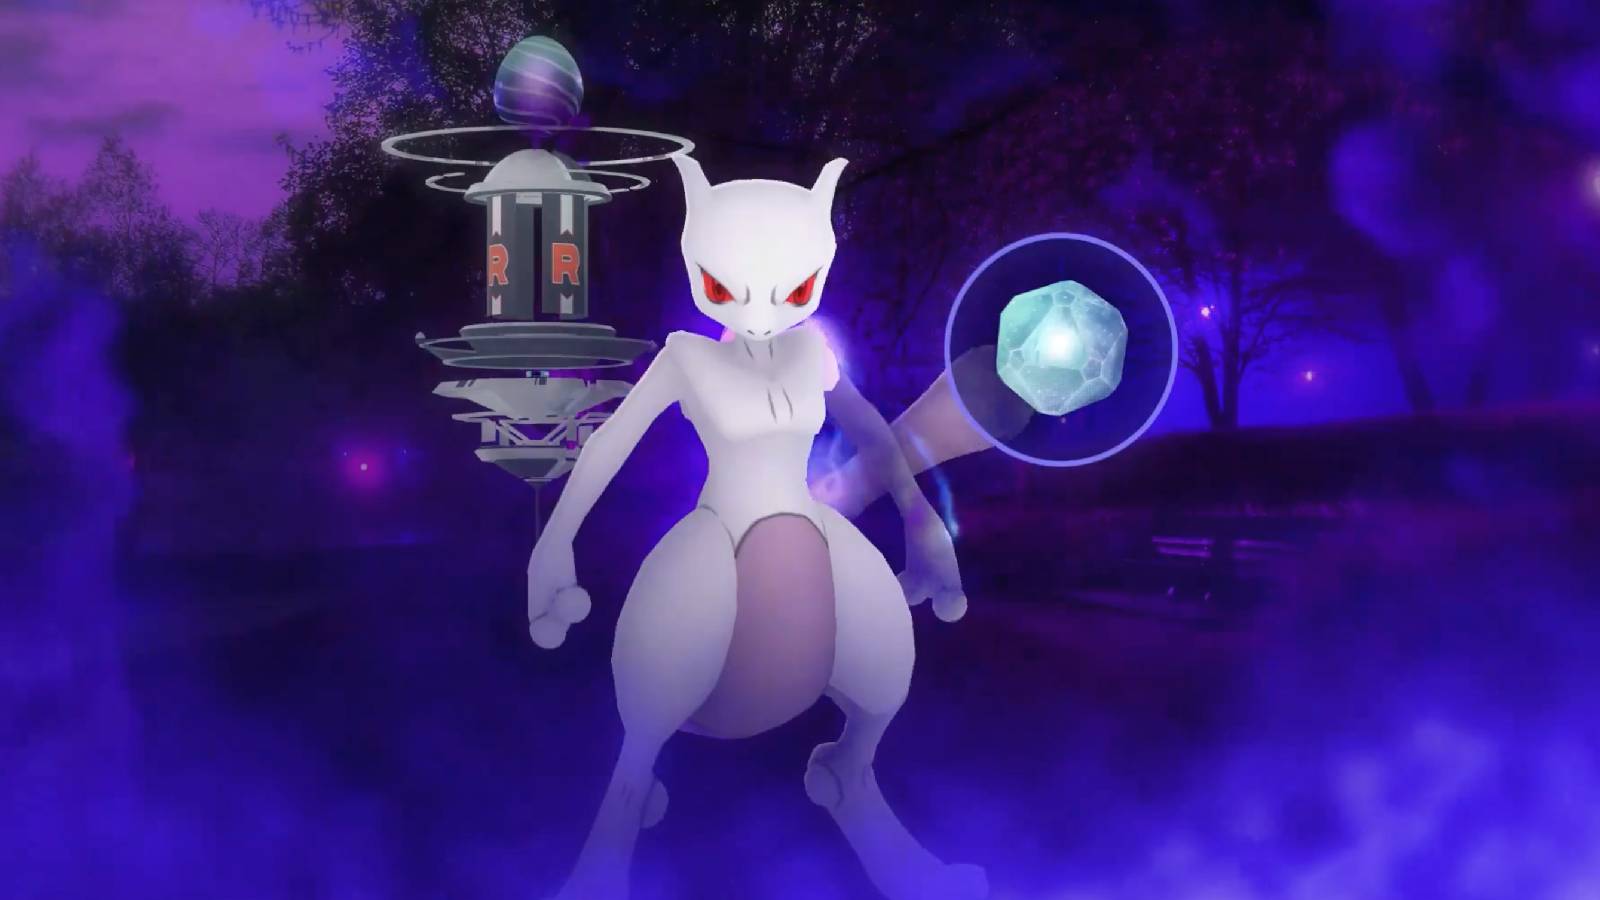 The Pokemon Mewtwo appears floating in the air, alongside a Pokemon Go purified gem